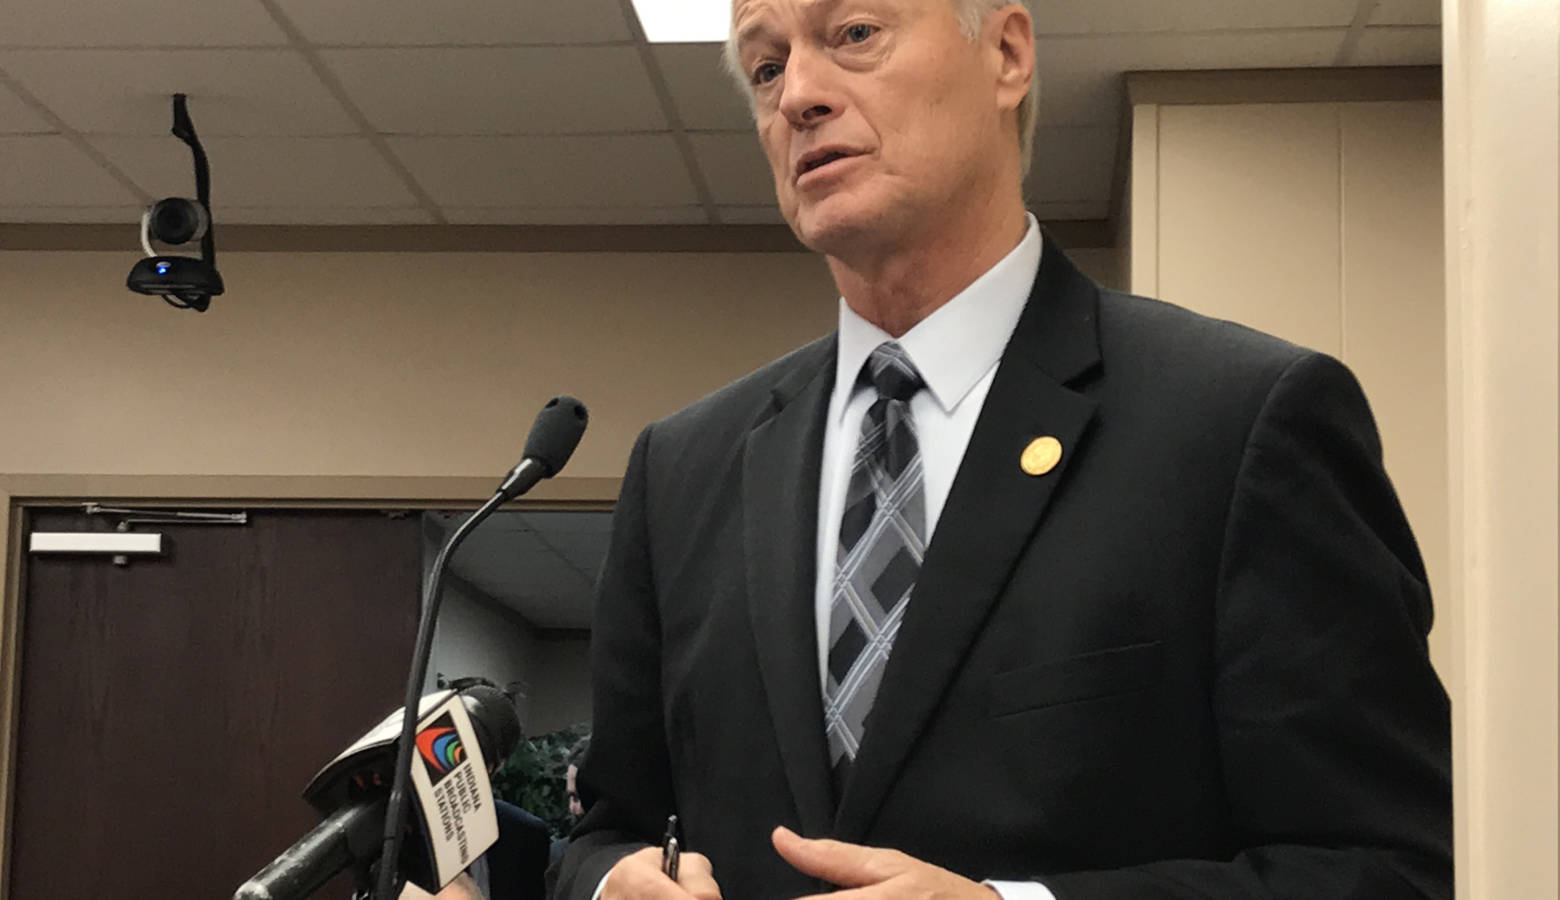 Rep. Randy Frye's (R-Greensburg) bill aims to help solve Indiana’s jail overcrowding problem by moving some inmates to Department of Correction facilities. (Brandon Smith/IPB News)